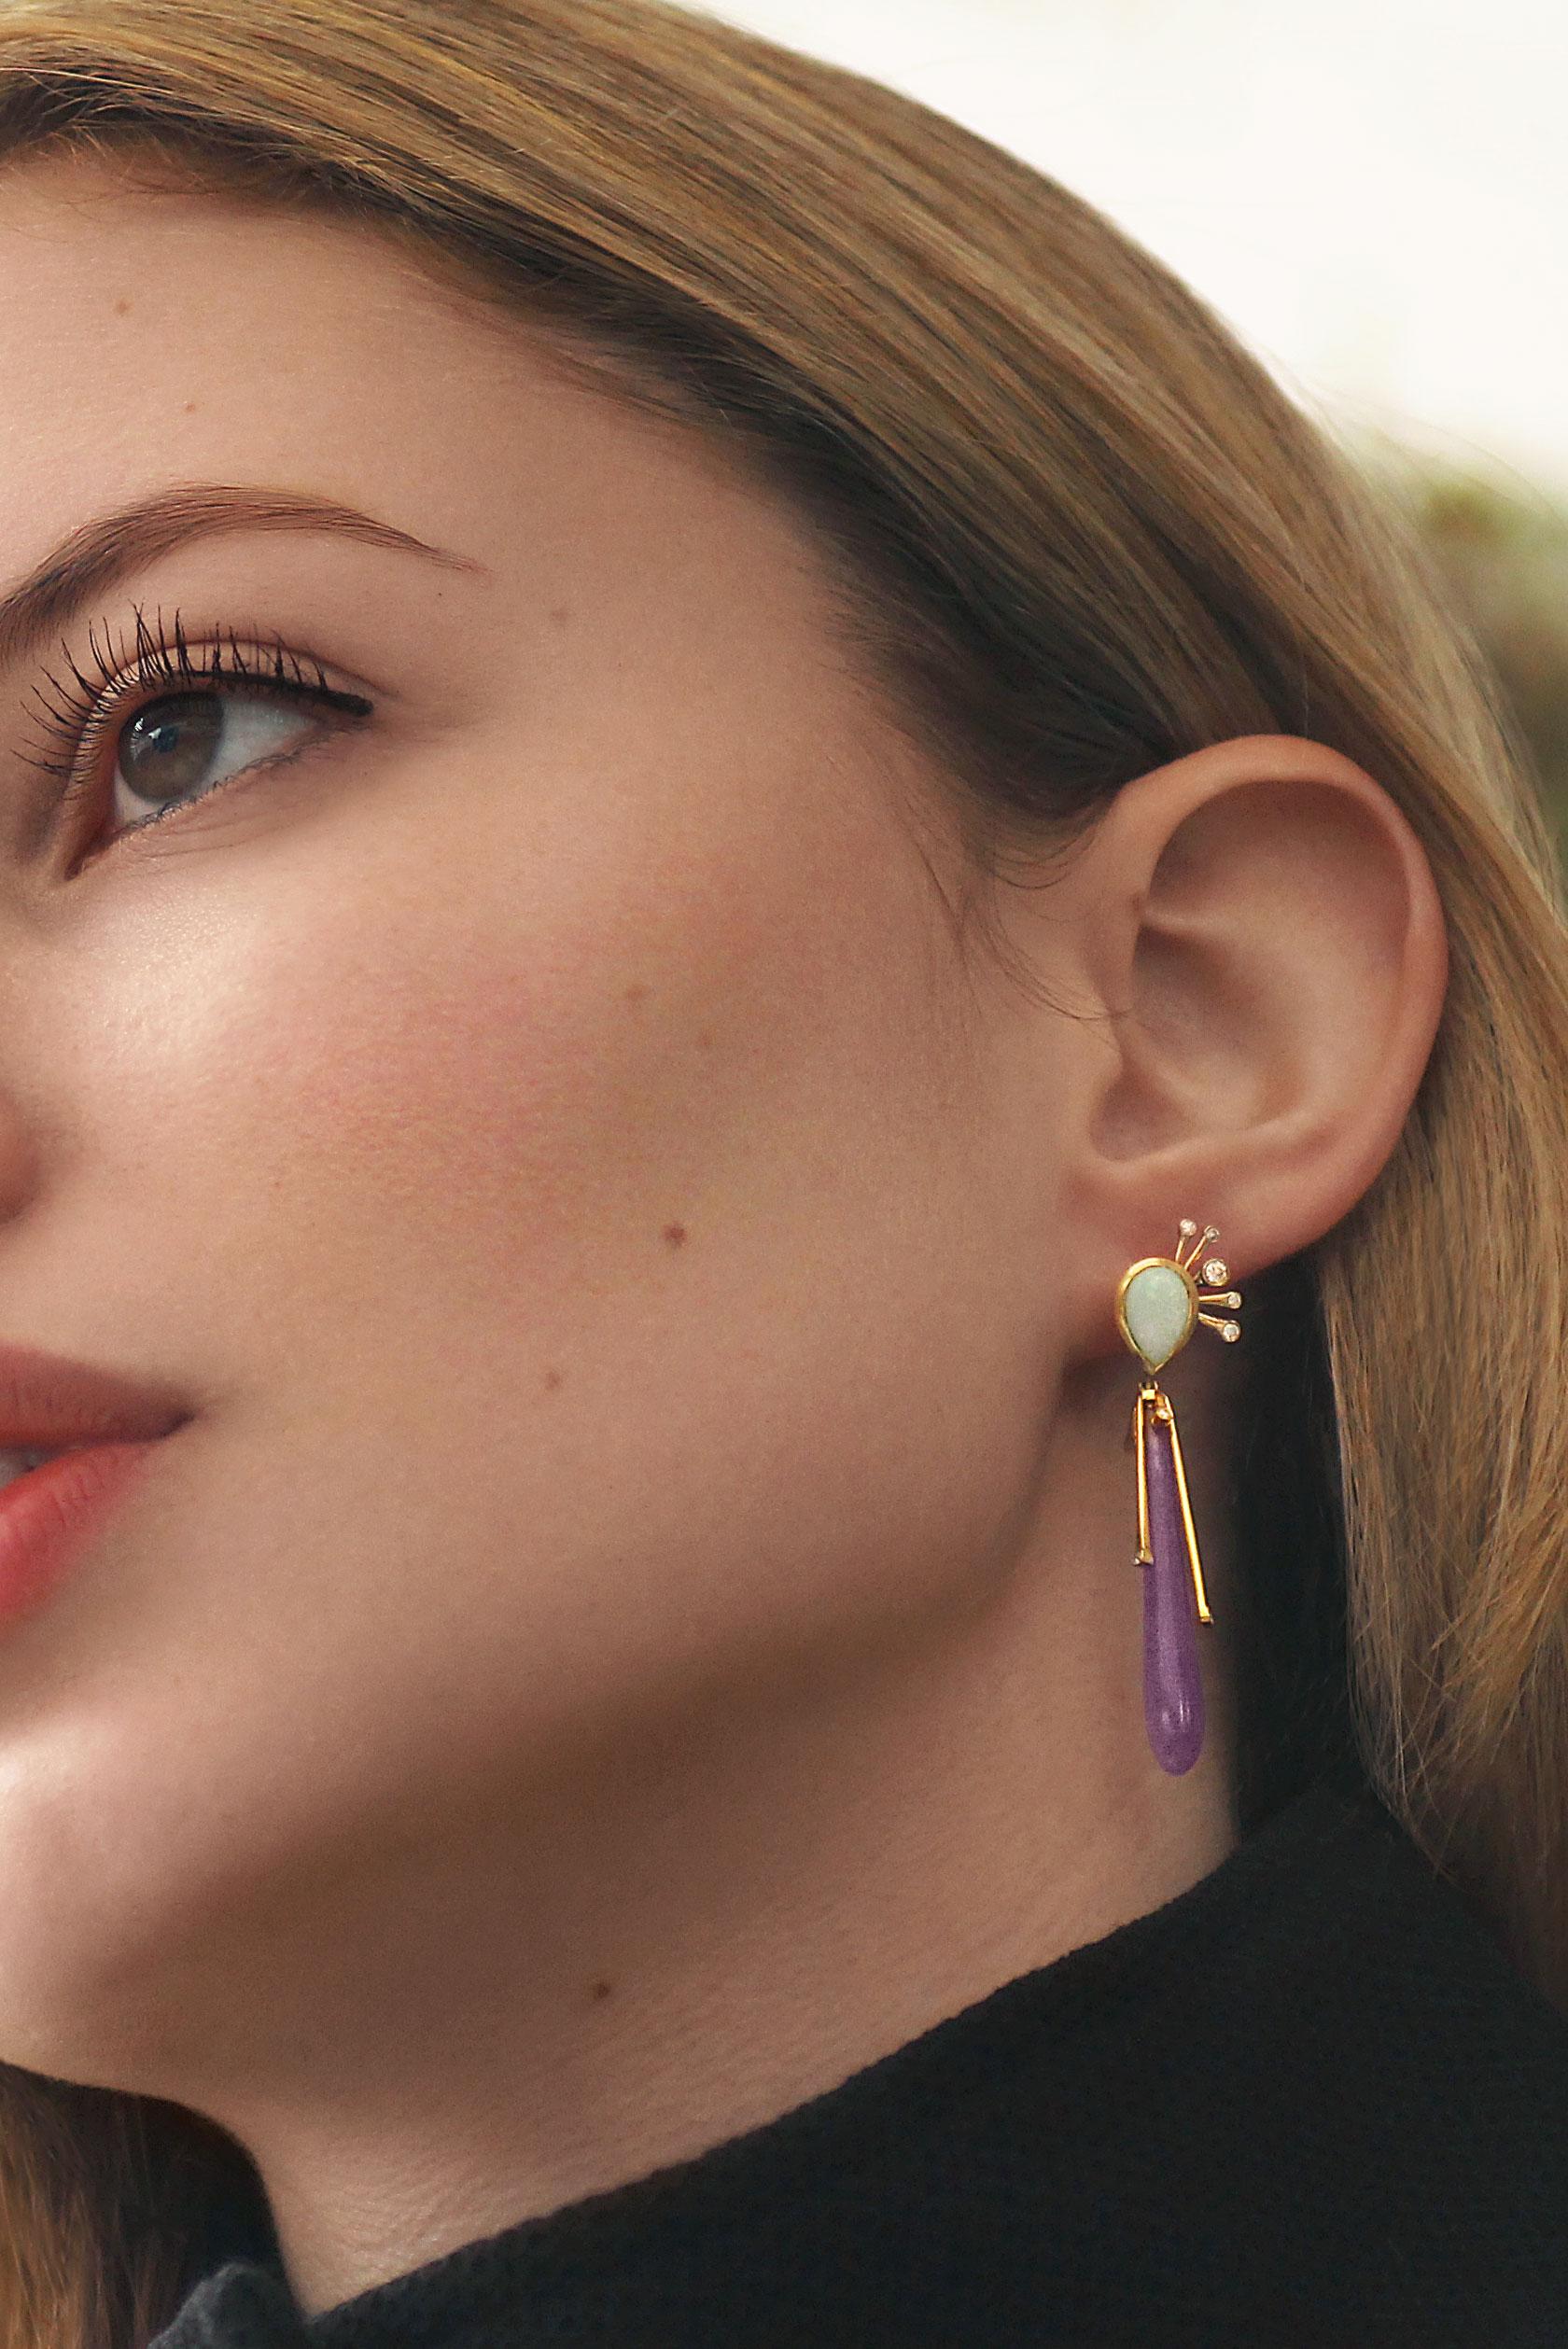 Delicate yet Bold Long Statement Earrings that Encapsulate the Colours of Summer. Handcrafted in 18 Carat Yellow Gold with Opals, Jade and Diamonds.
The Opals stay close to the ear whilst the Jade and lines of gold and diamonds move with your body,